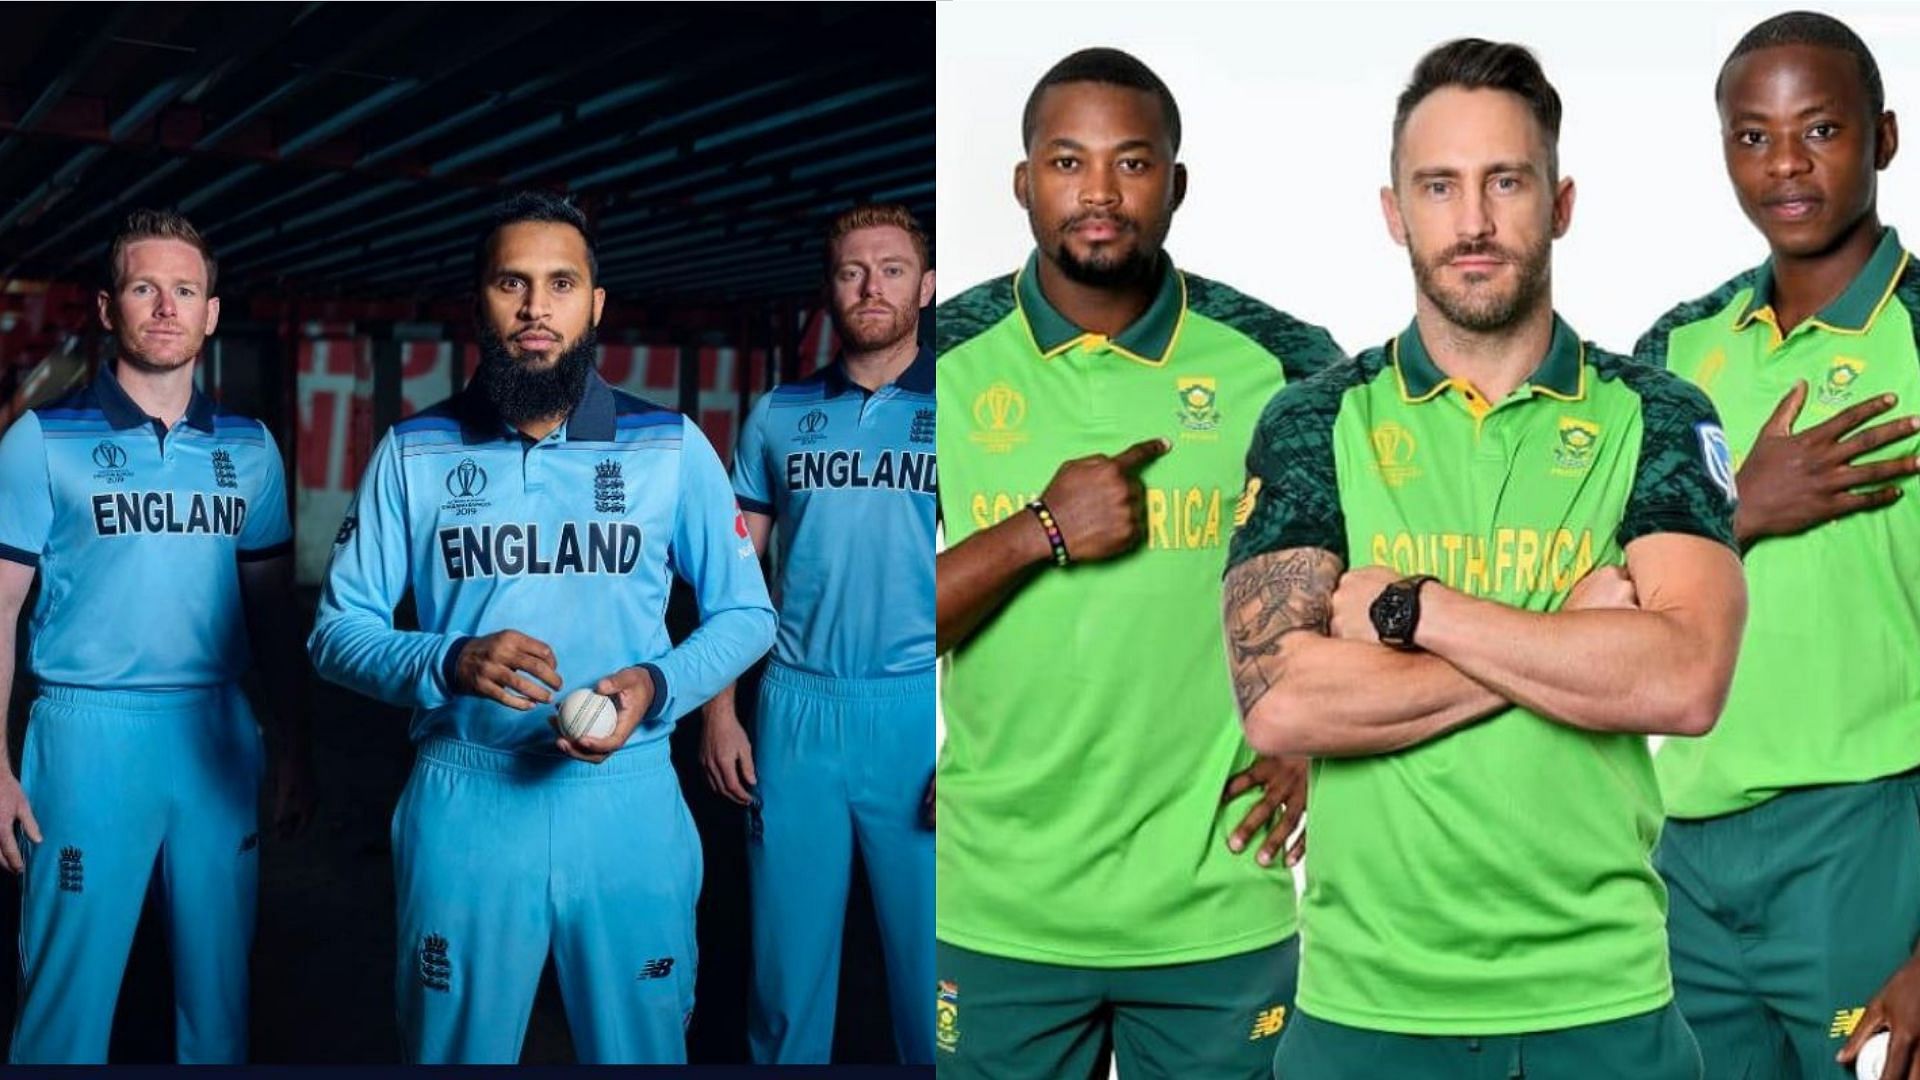 Eng vs SA Live Streaming Online, England versus South Africa Cricket Score Online, Watch Live Telecast and Streaming Online on DD Sports, Hotstar, Star Sports